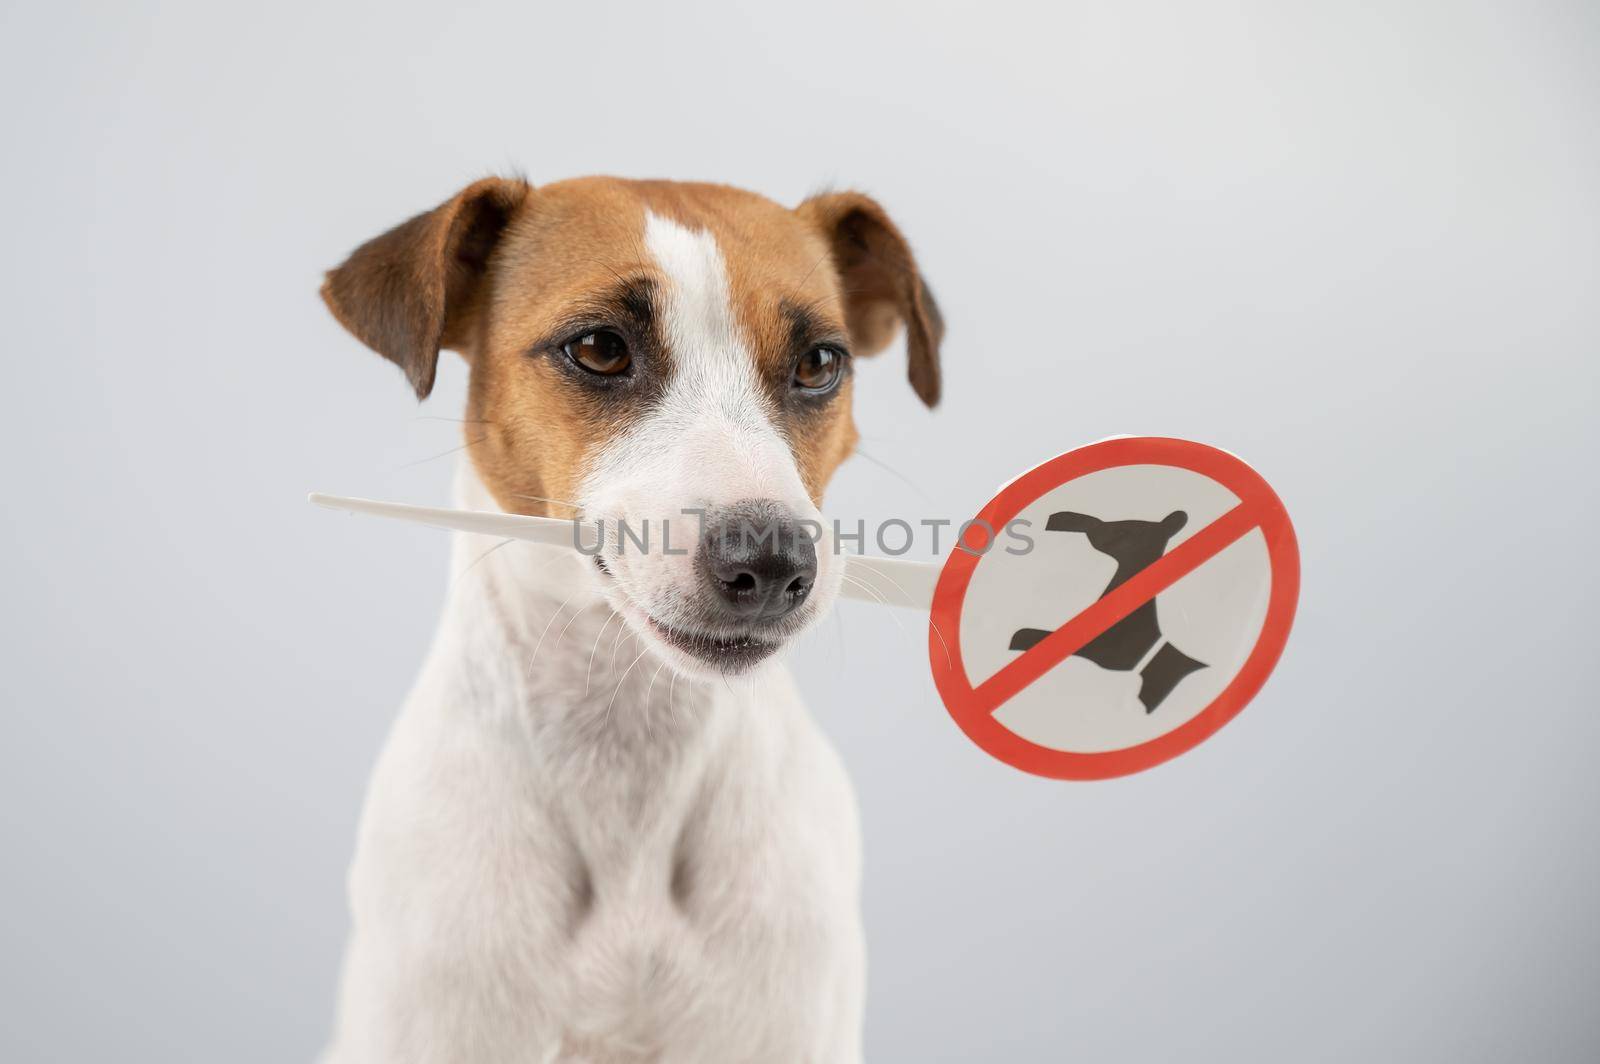 Dog jack russell terrier holding a sign dogs are not allowed on a white background